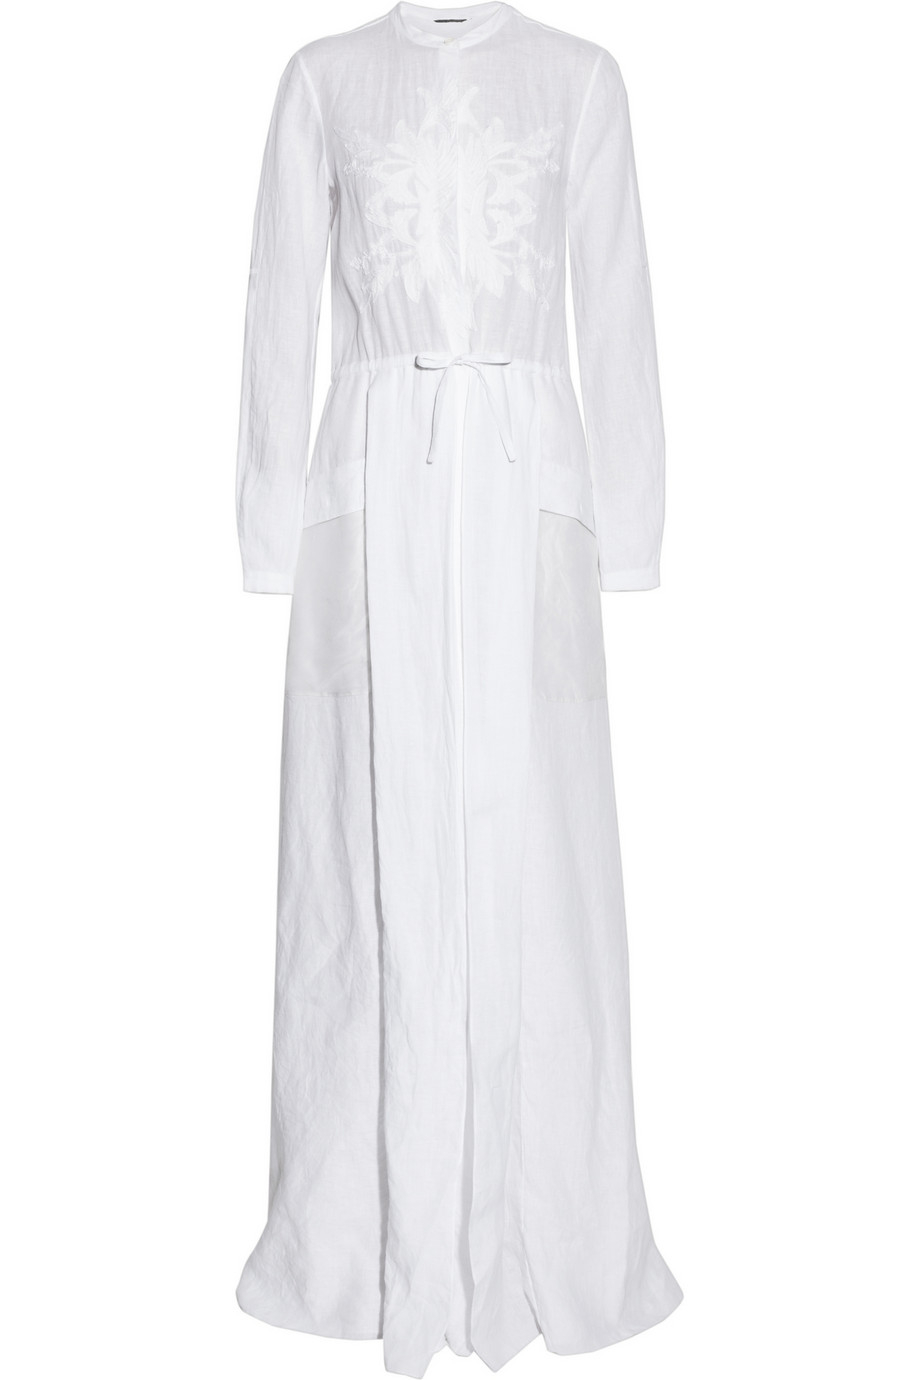 Maiyet Embroidered Linen Maxi Dress in White | Lyst